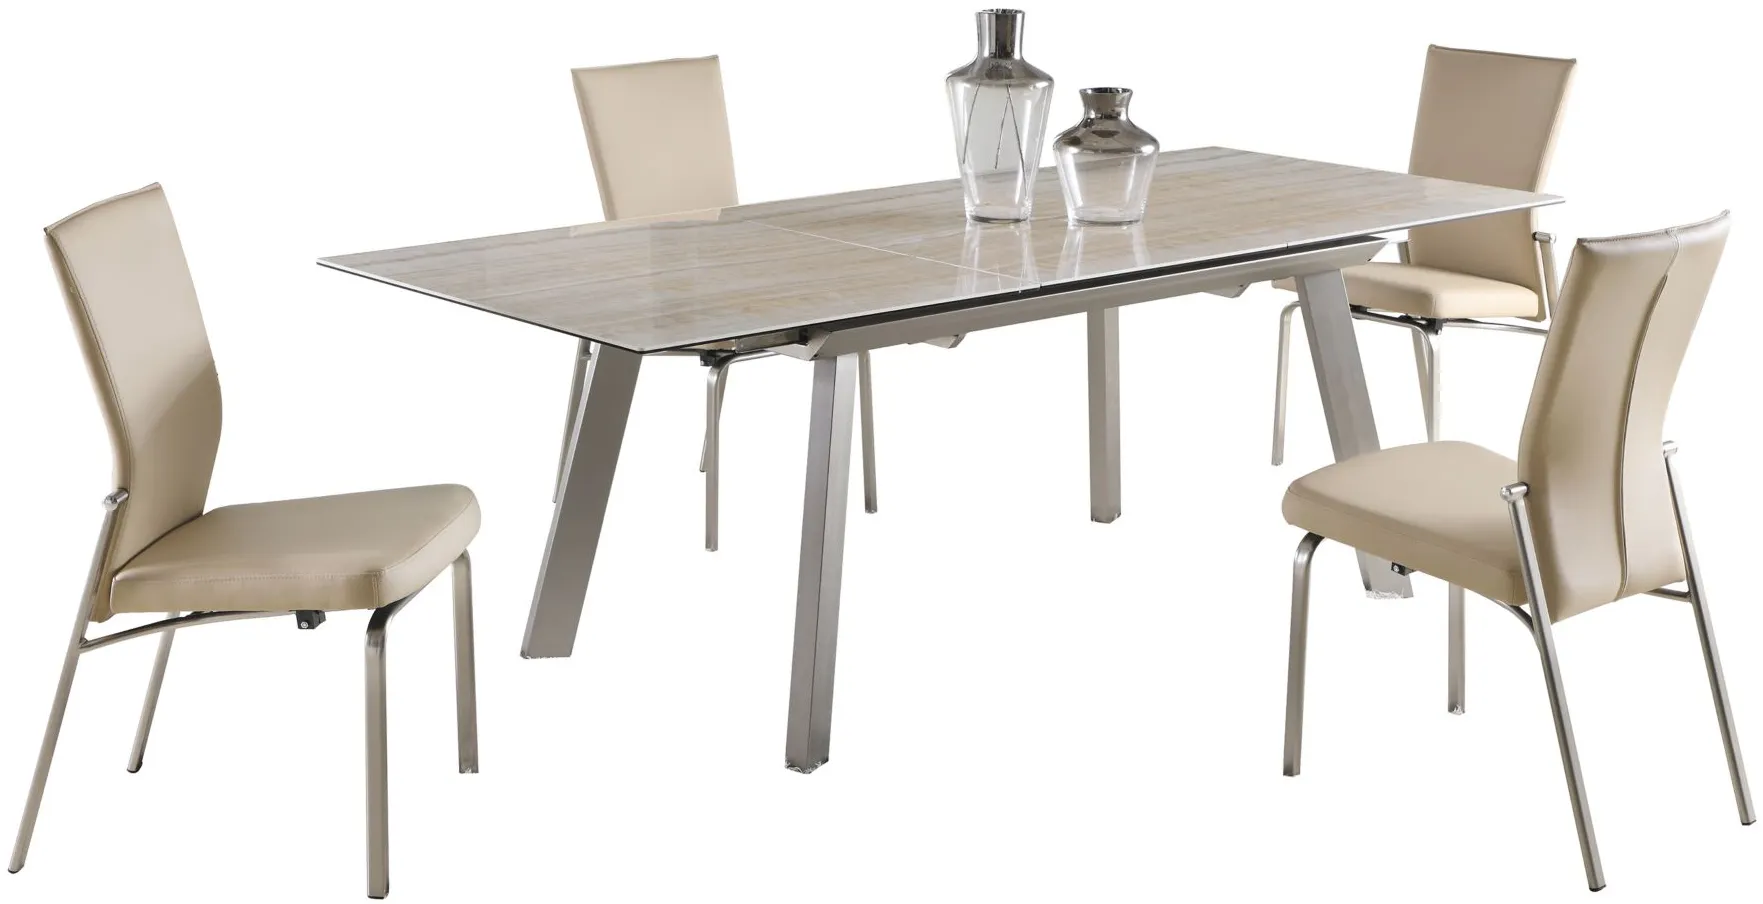 Eleanoir 5-pc. Dining Set in Beige by Chintaly Imports